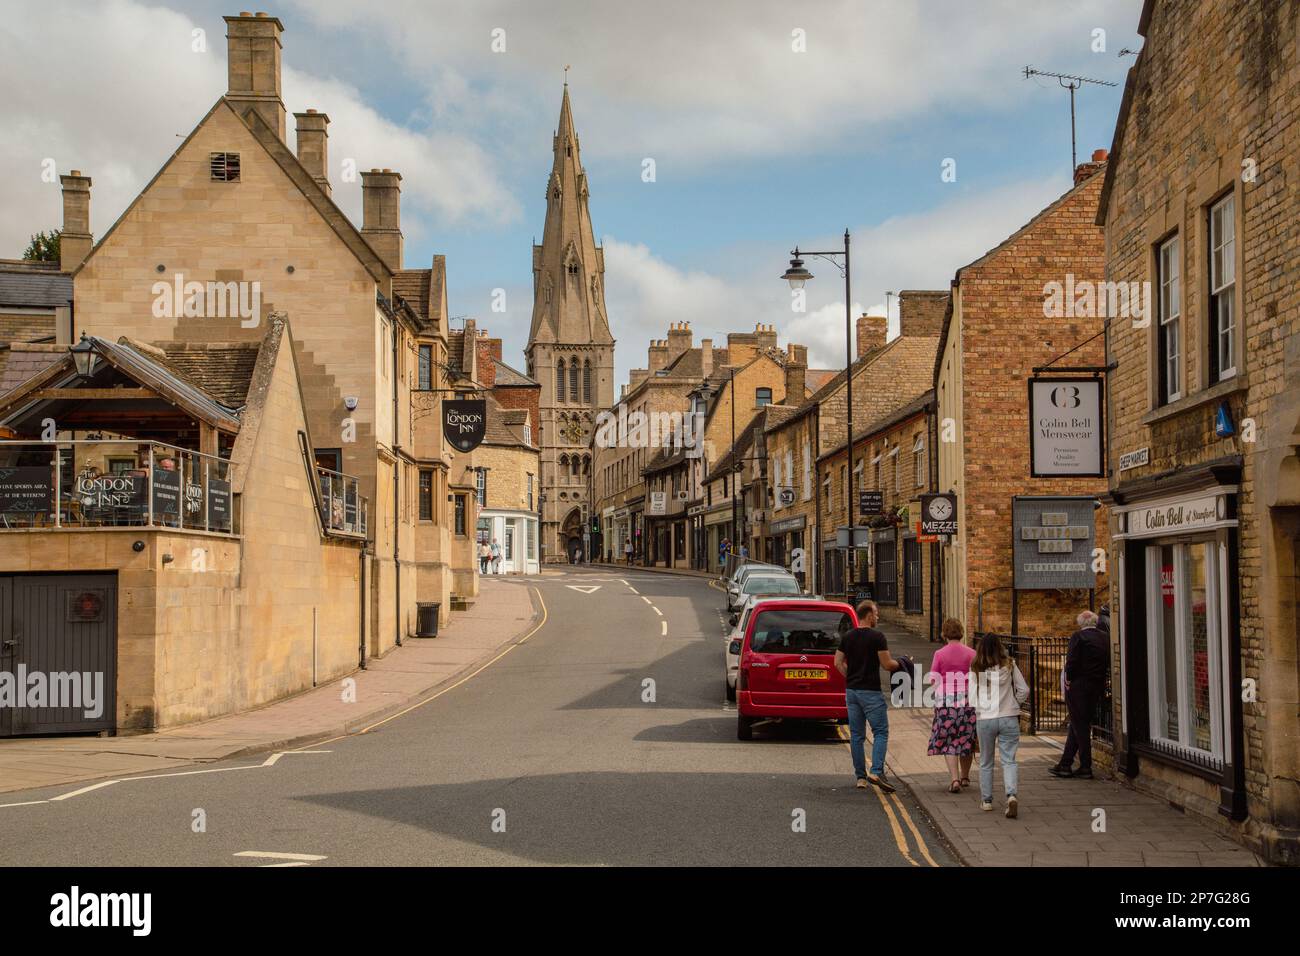 A view along Castle Street in Stamford to Saint Mary's church. Stamford is a town in Lincolnshire, England. Stock Photo